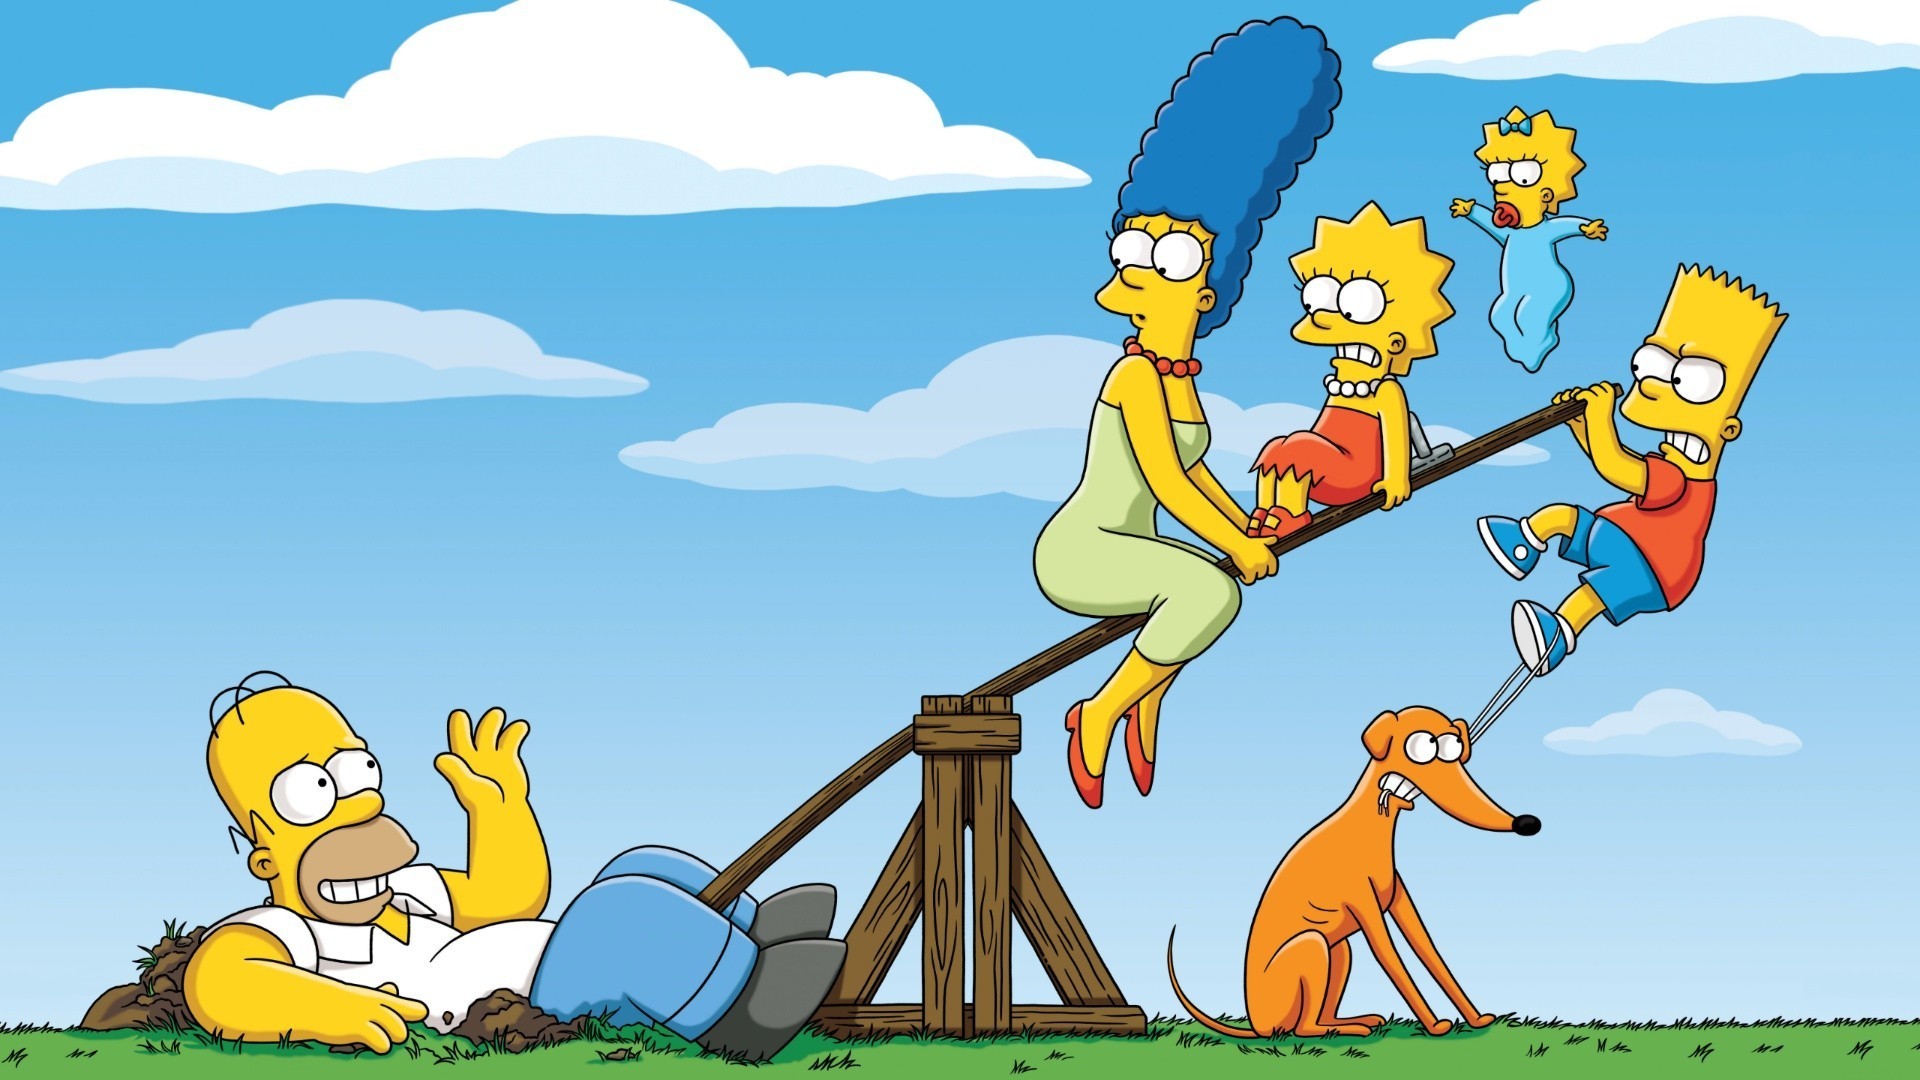 1920x1080 ... The Simpsons Wallpapers HD - Wallpaper Cave ...